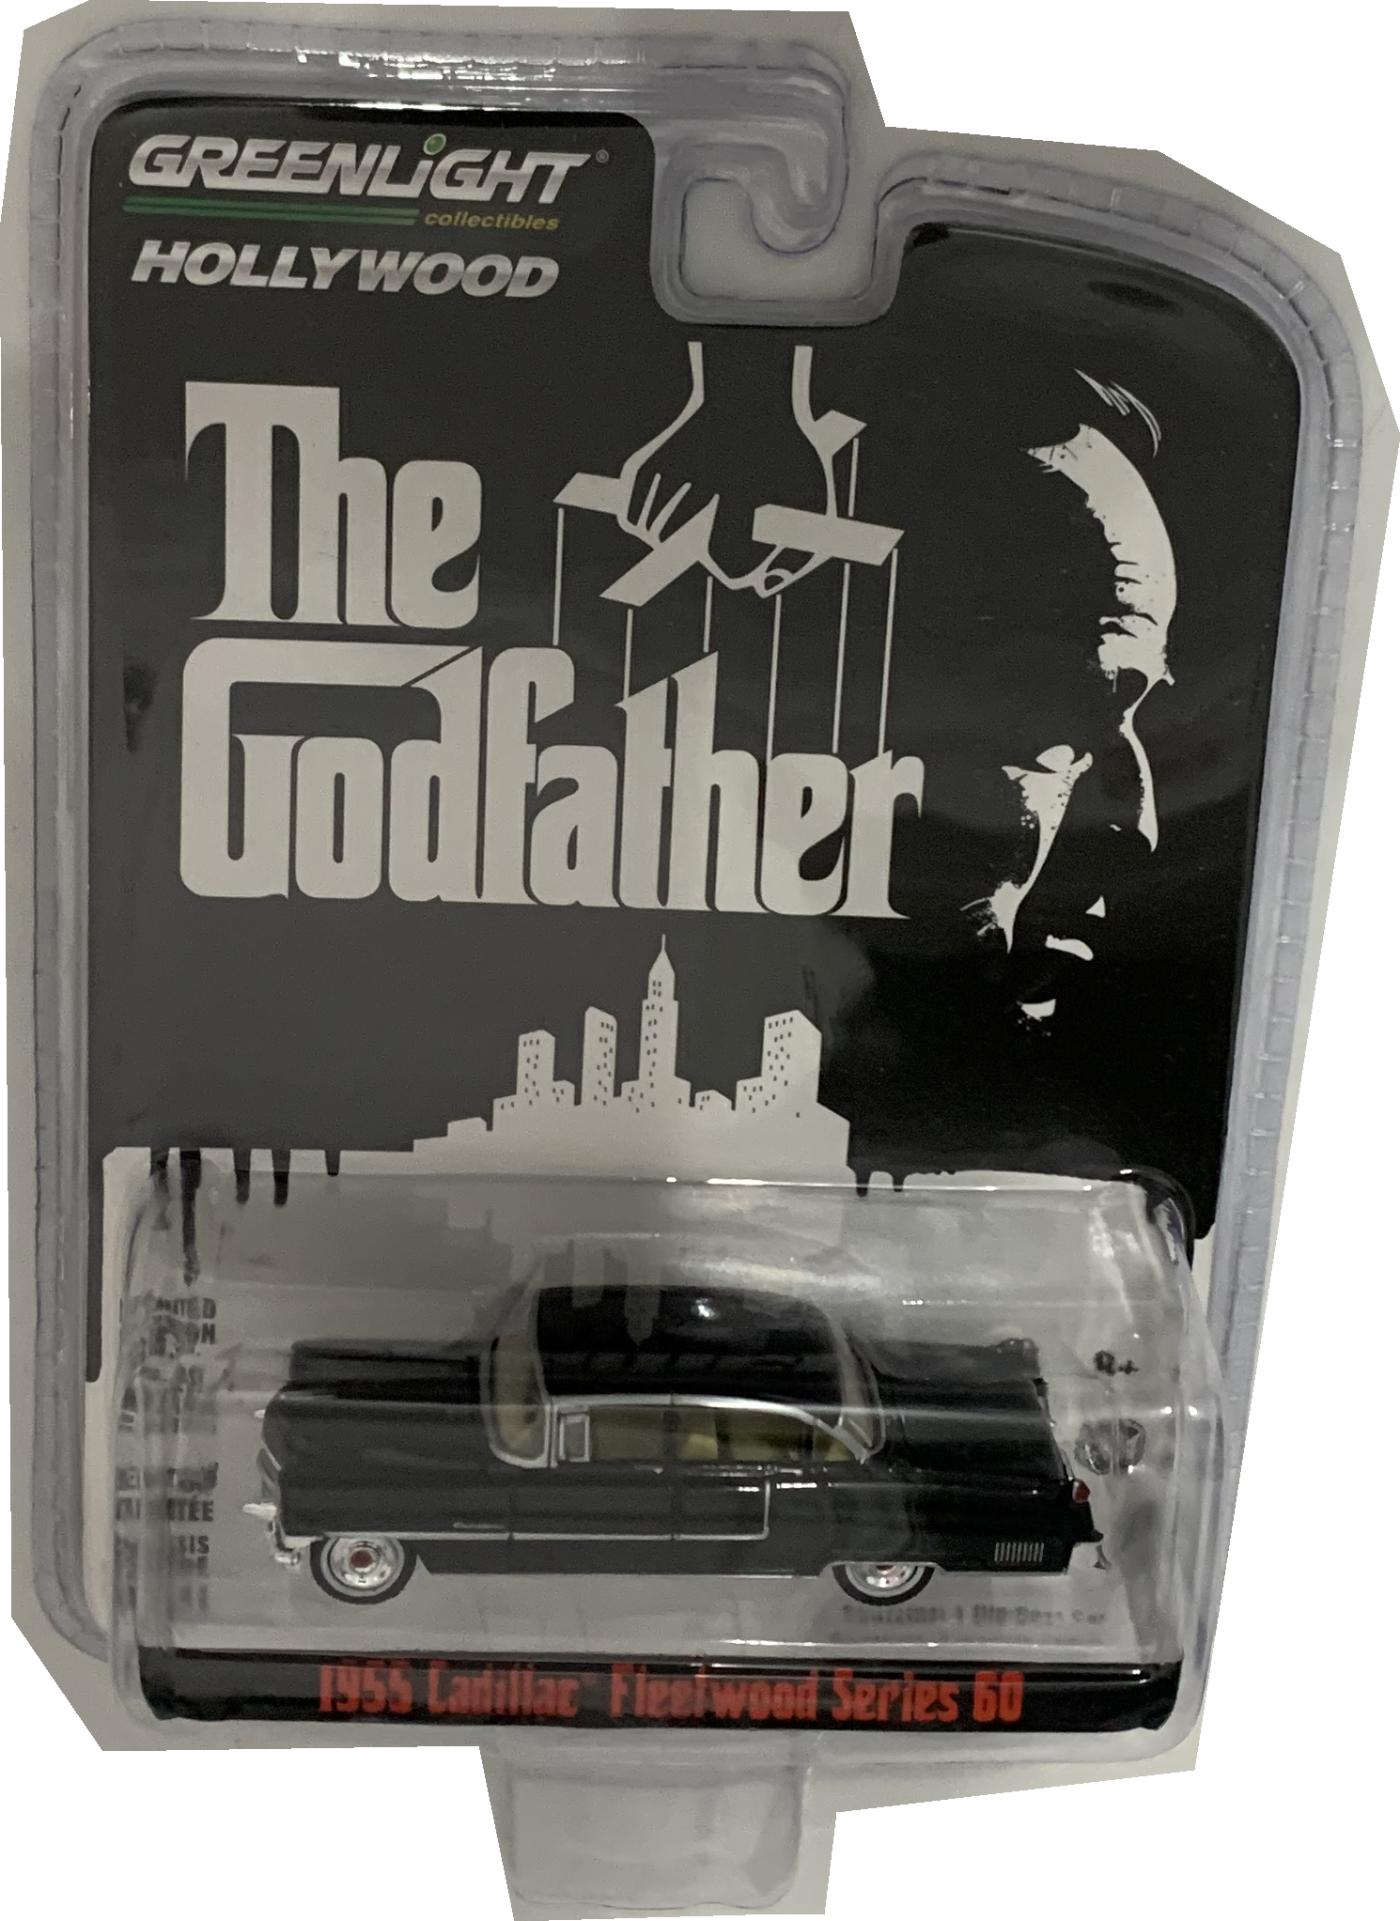 The Godfather 1955 Cadillac Fleetwood Series 60 in black 1:64 scale model from Greenlight, limited edition model